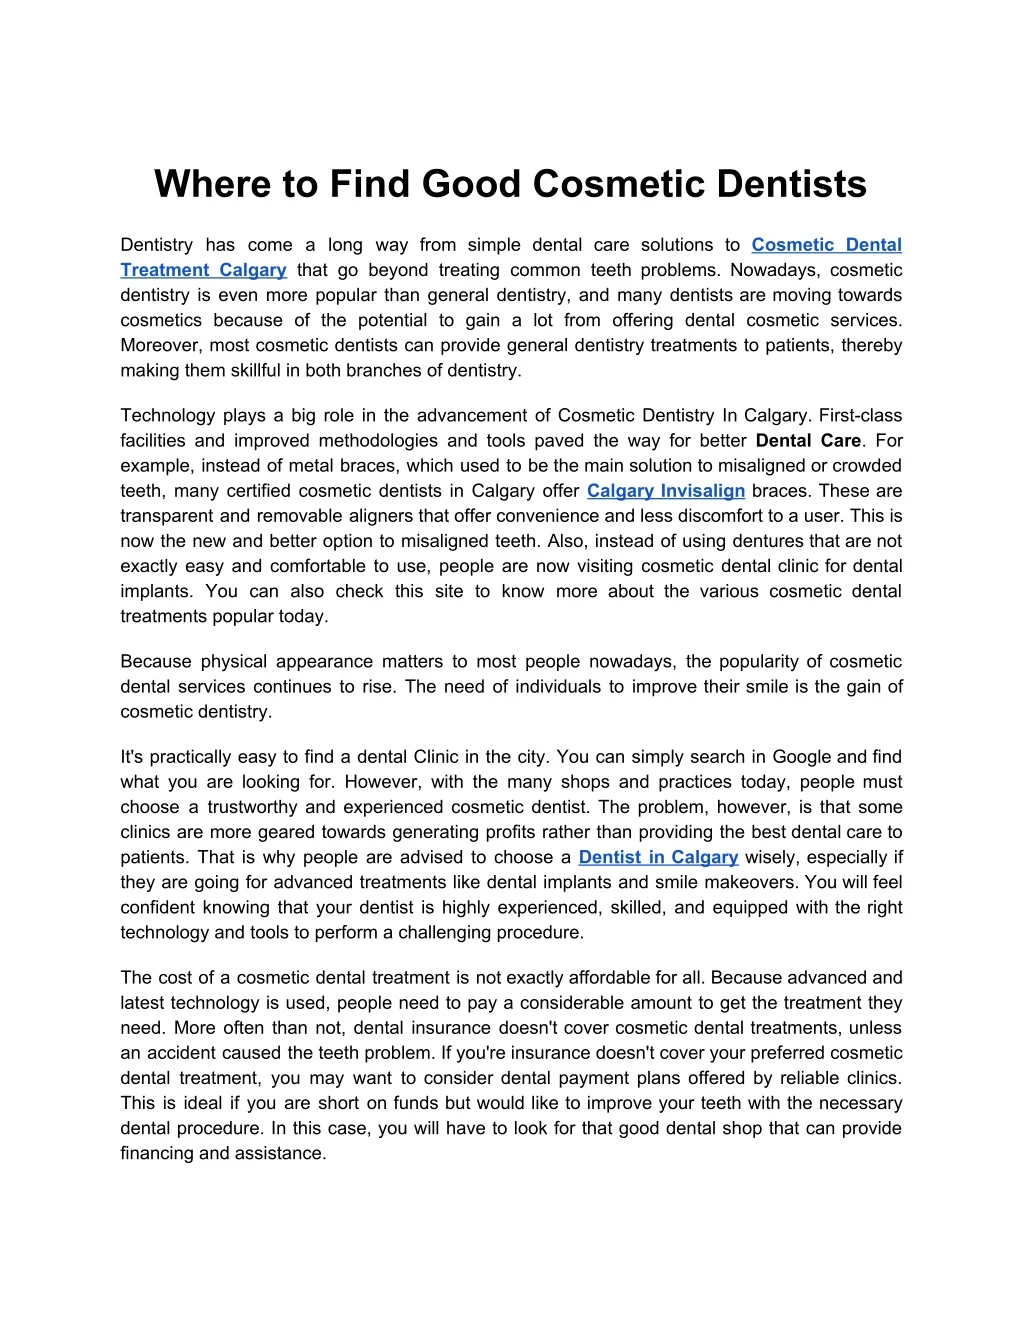 where to find good cosmetic dentists